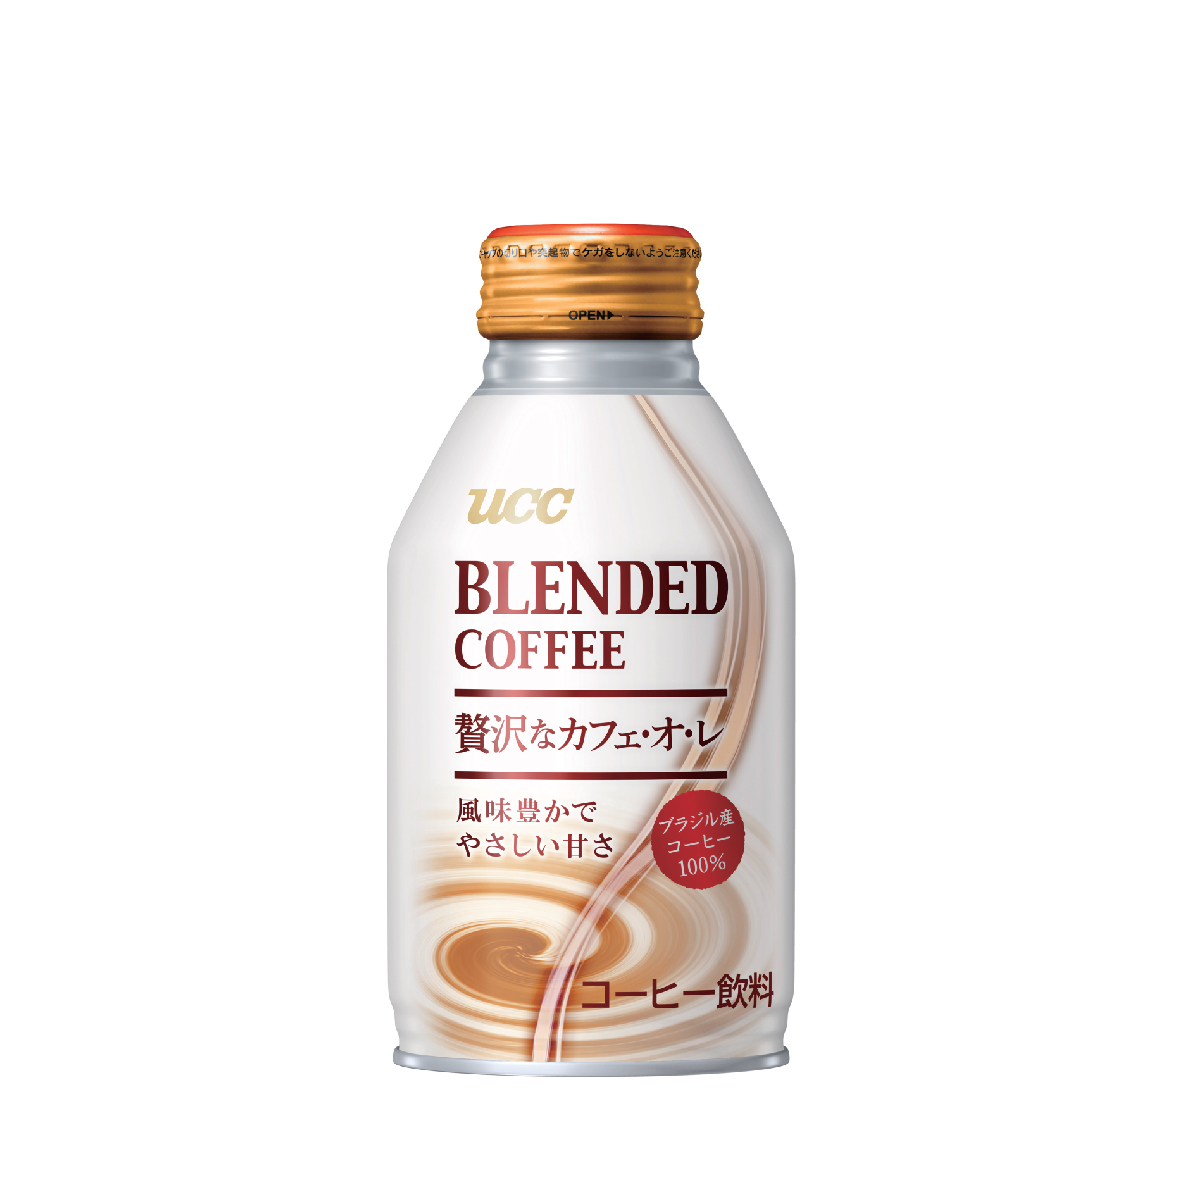 UCC Blended Coffee Cafe Au Lait